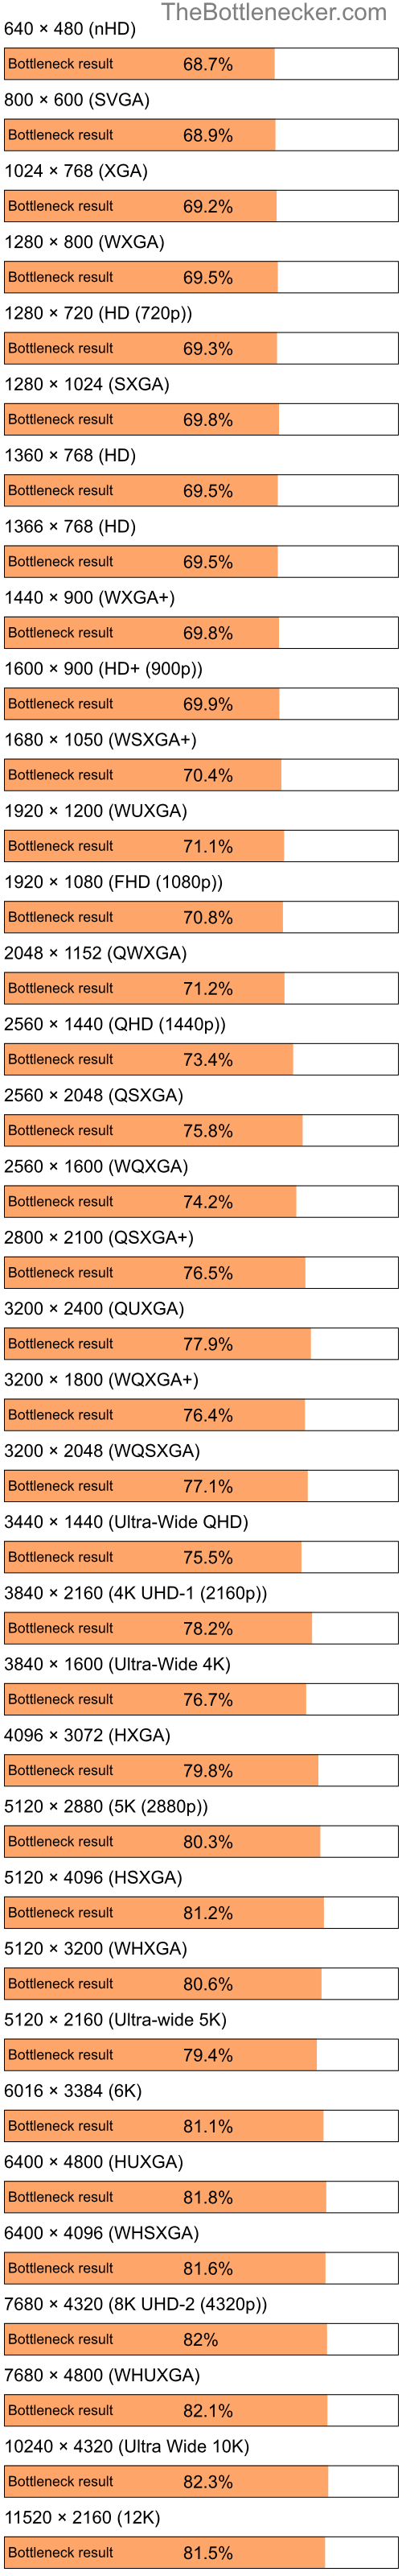 Bottleneck results by resolution for Intel Celeron M 420 and AMD Radeon HD 7290 in Graphic Card Intense Tasks